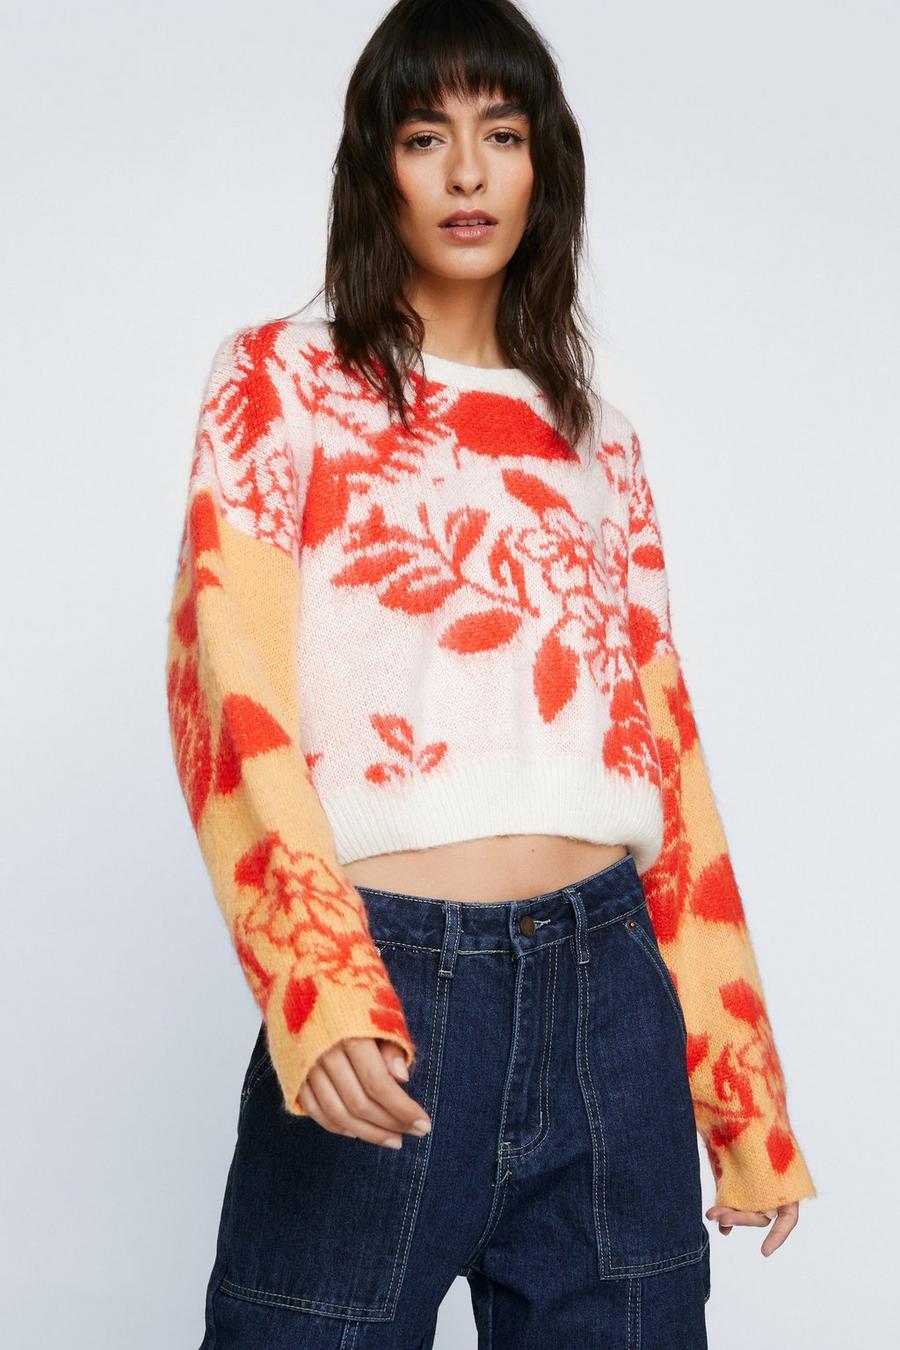 Women's Sweaters | Knit Jumpers & Sweater | Nasty Gal